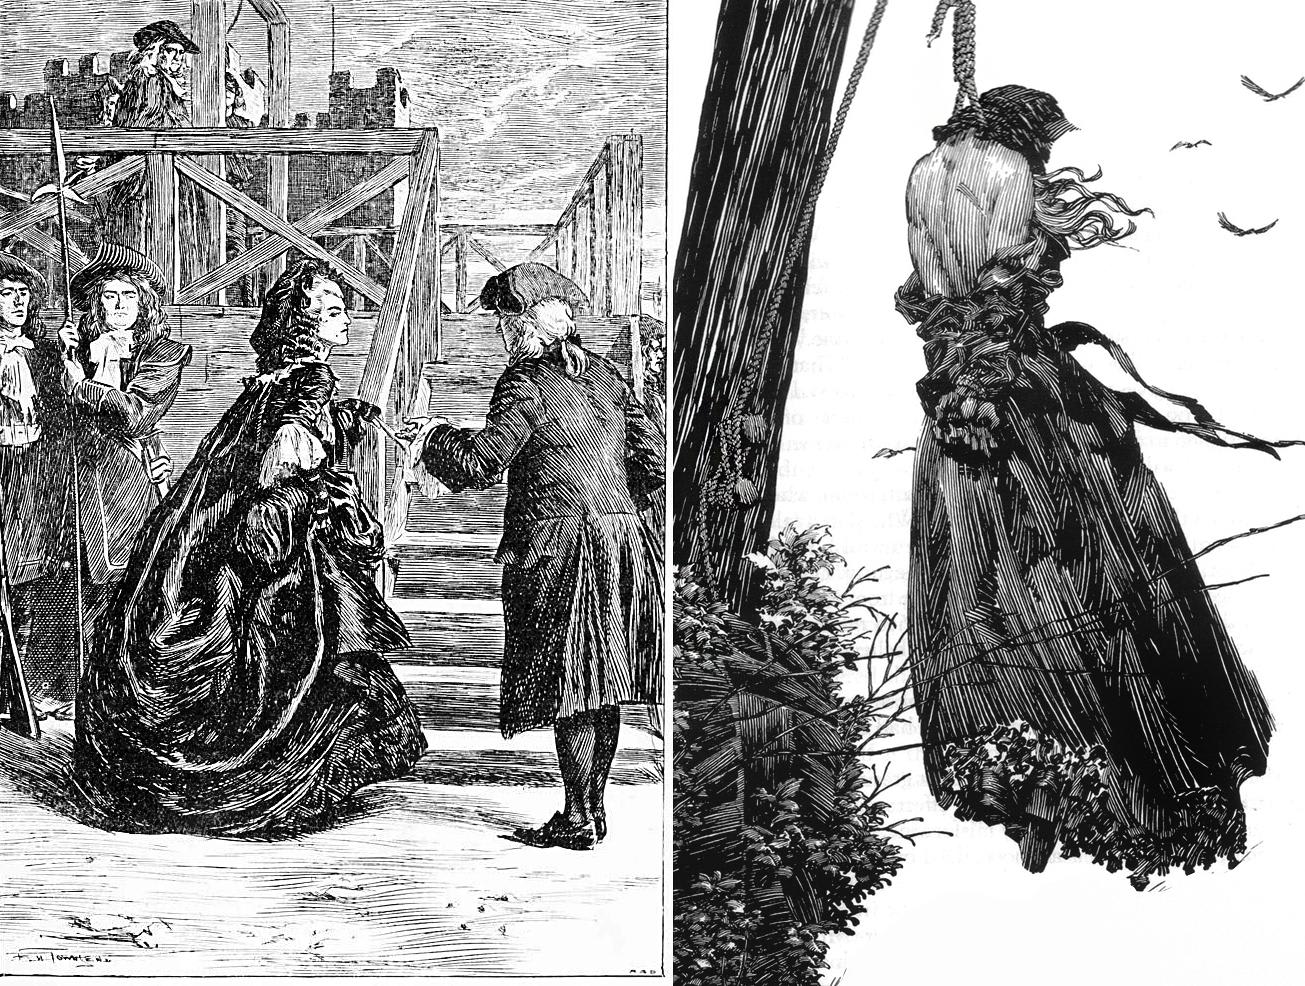 "...Thousands flocked to See Her Die. There were people who Rented the Towers of Notre-Dame..." - The Hanging of the Murderess Madame Lescombat in Paris